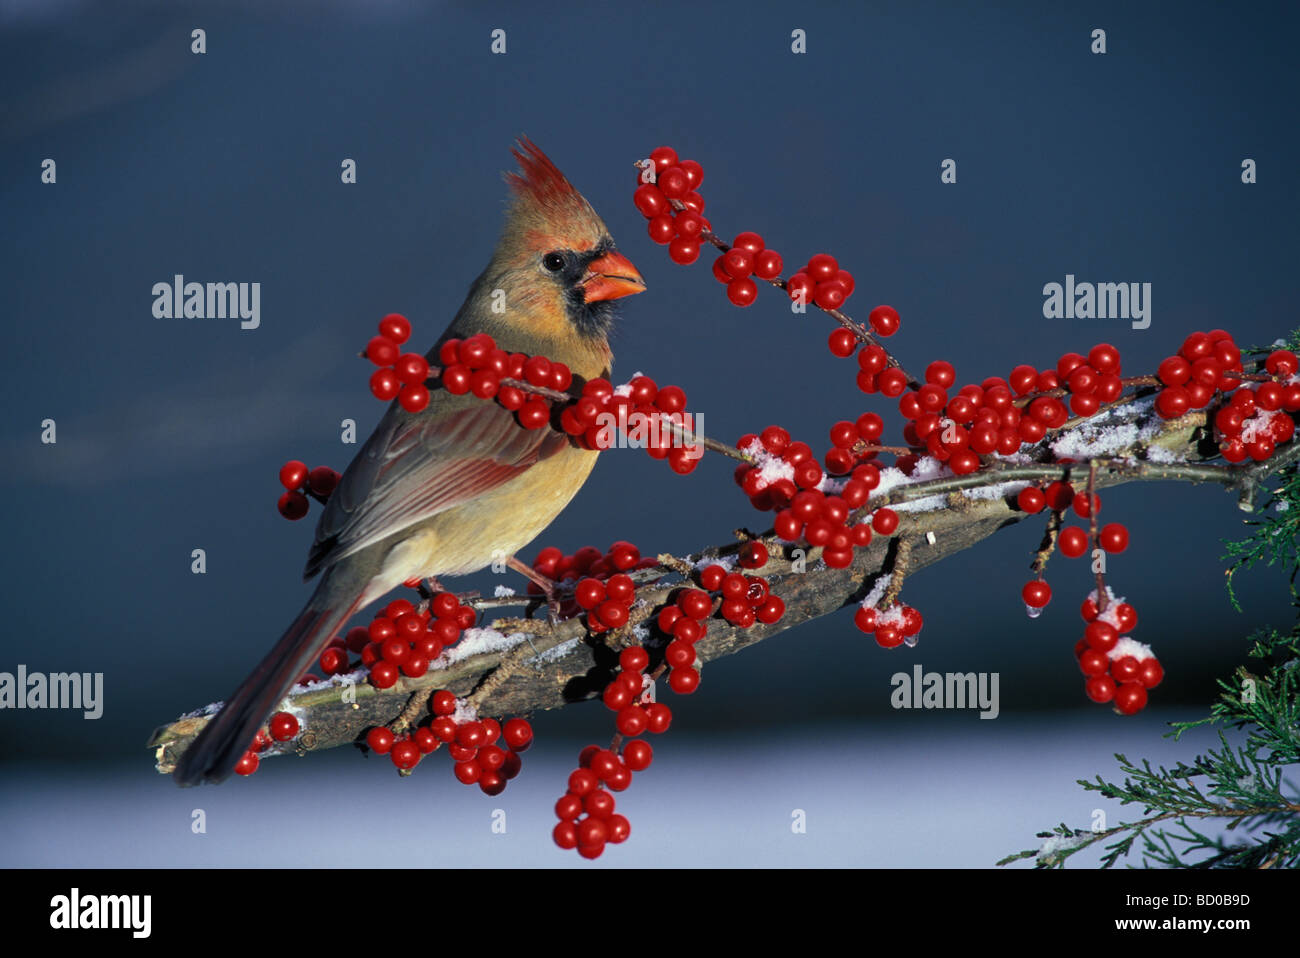 Female Cardinal on branch with bright red berries in winter Stock Photo